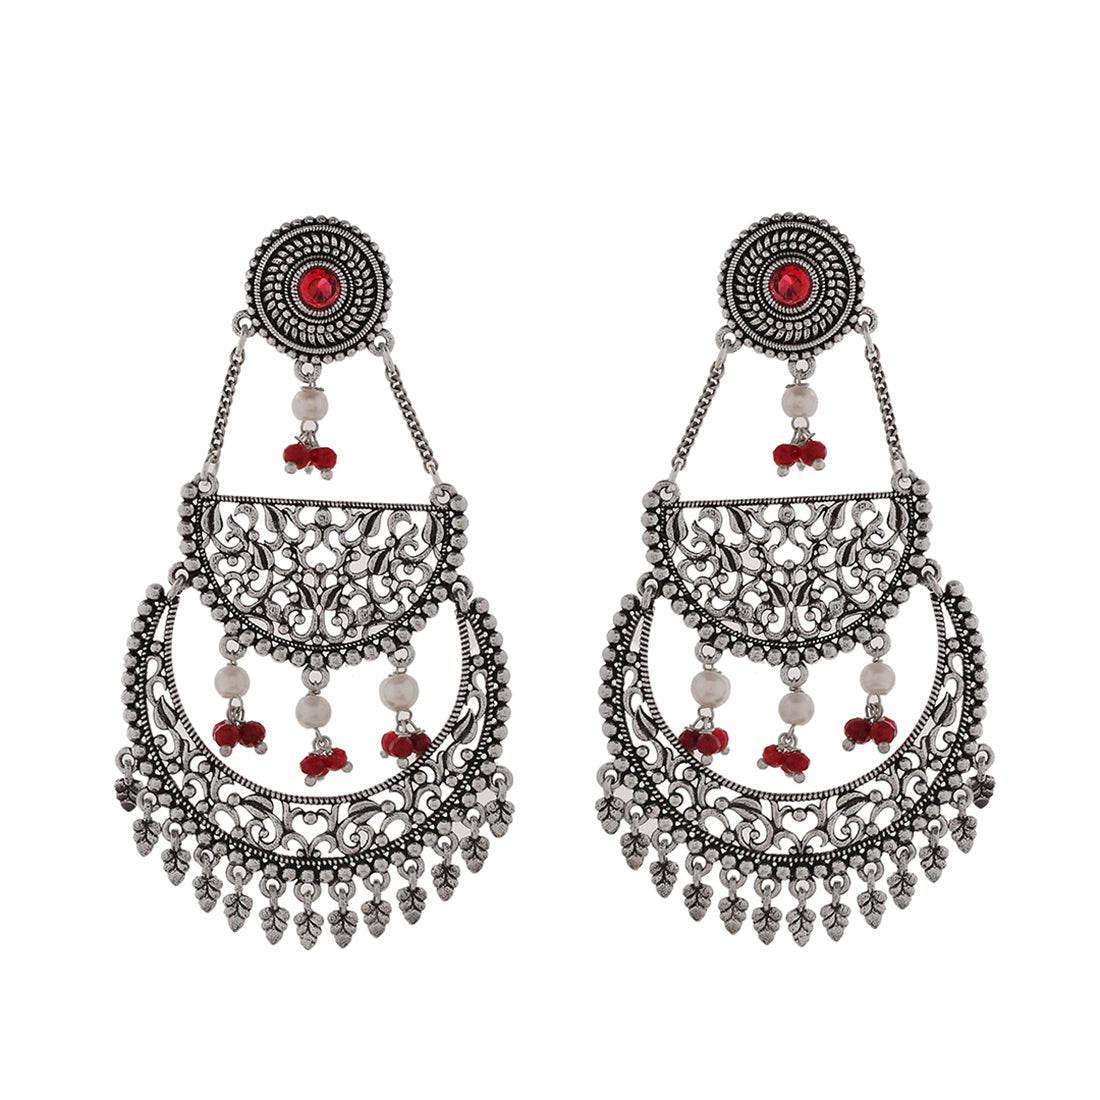 Women's Abharan Pink Stones And Pearls Layered Drop Earrings - Voylla